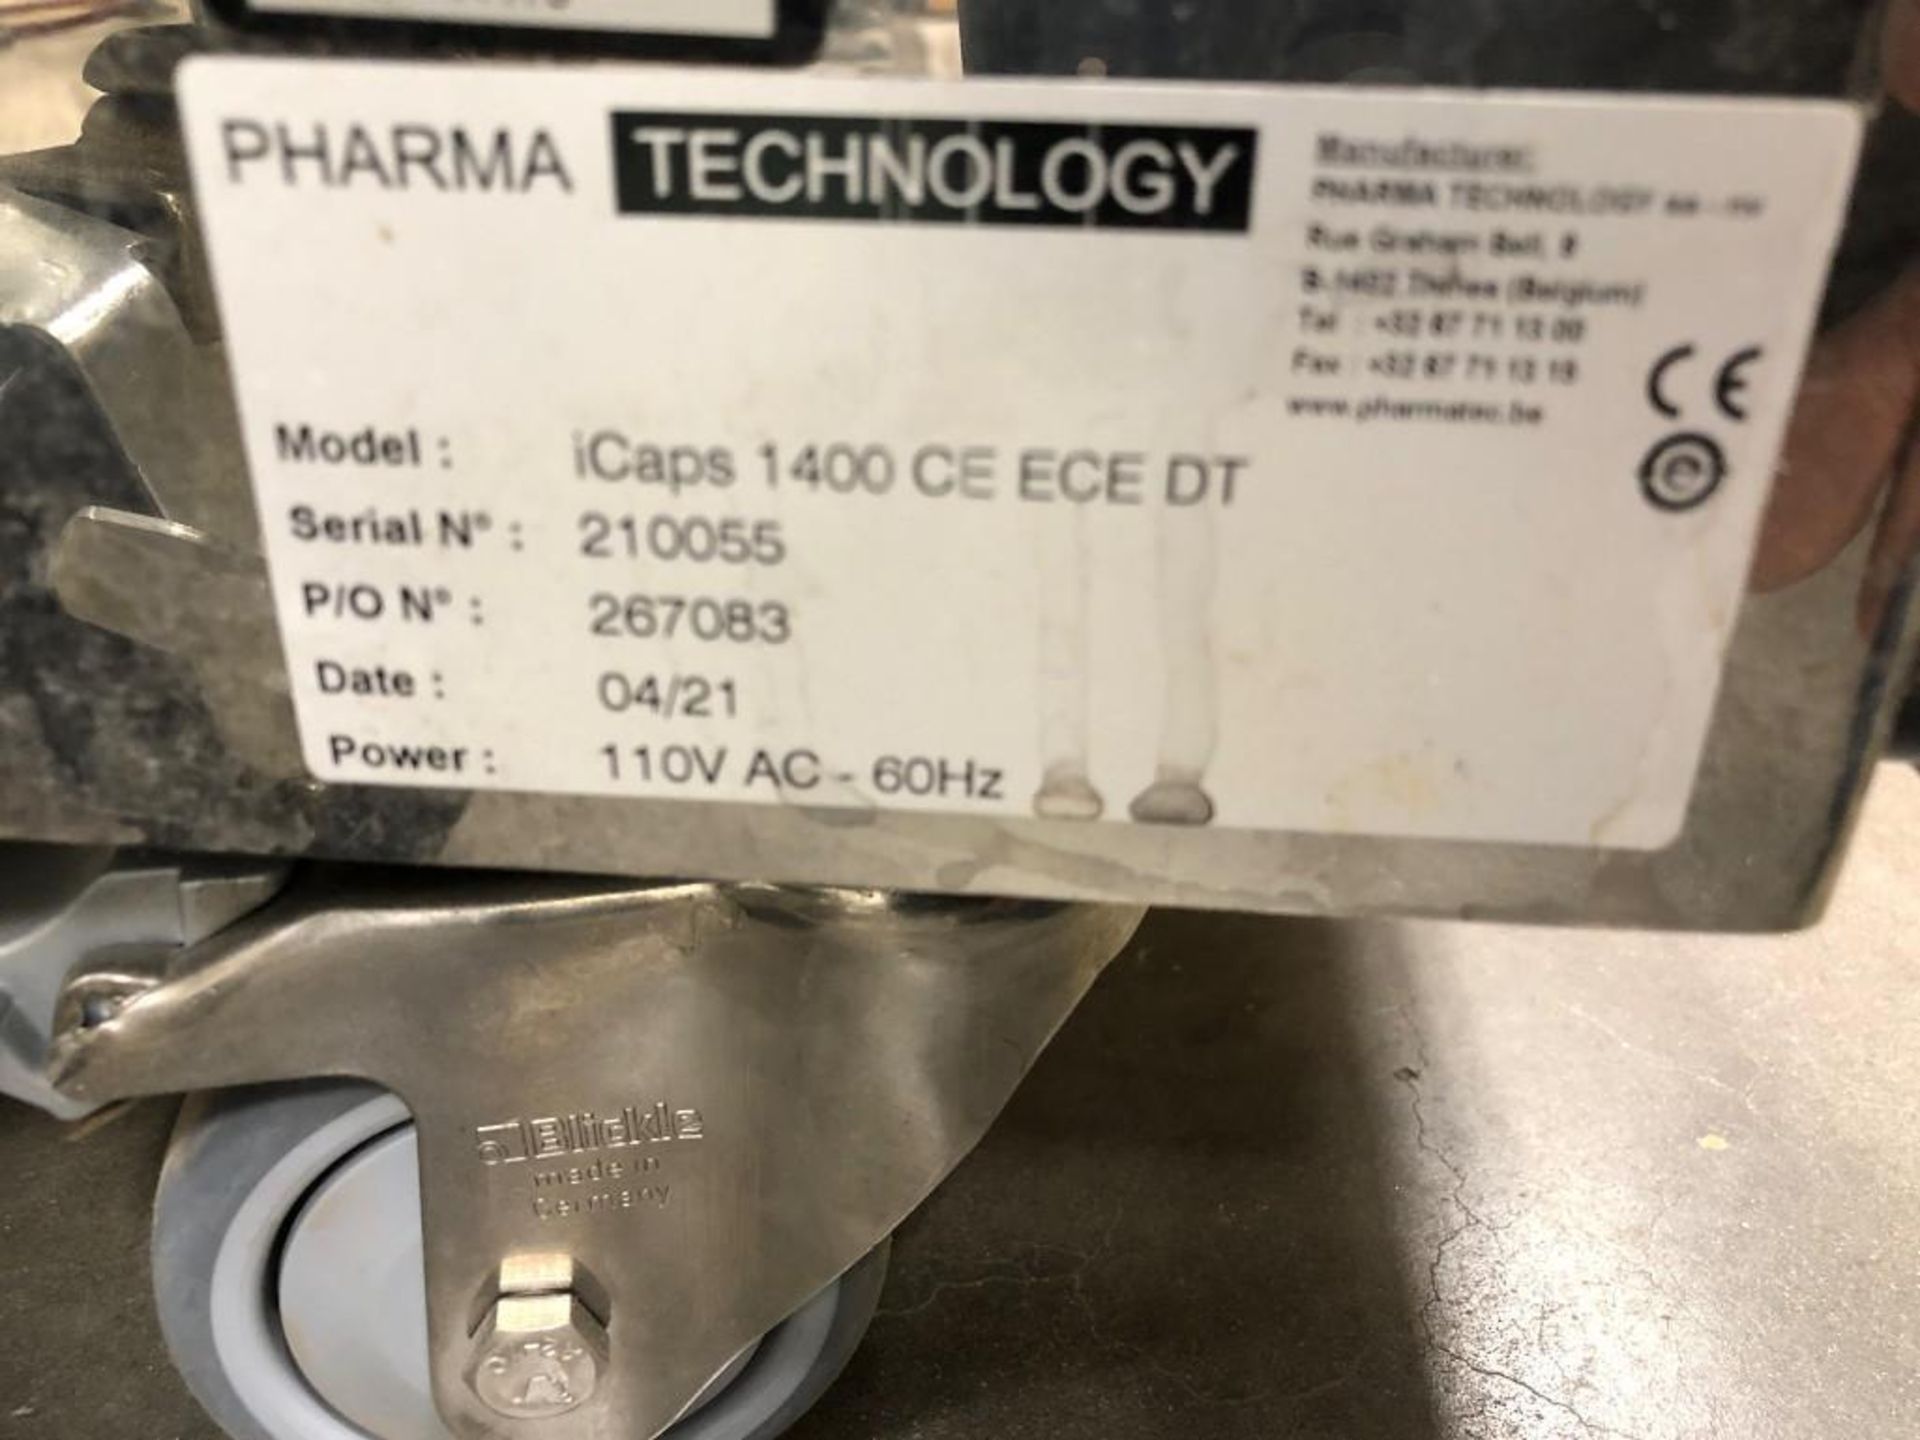 New! Pharma Technologies Vertical 5 Model iCaps 1400 CE ECE DT Capsule Polisher w/ Metal Check - Image 12 of 28